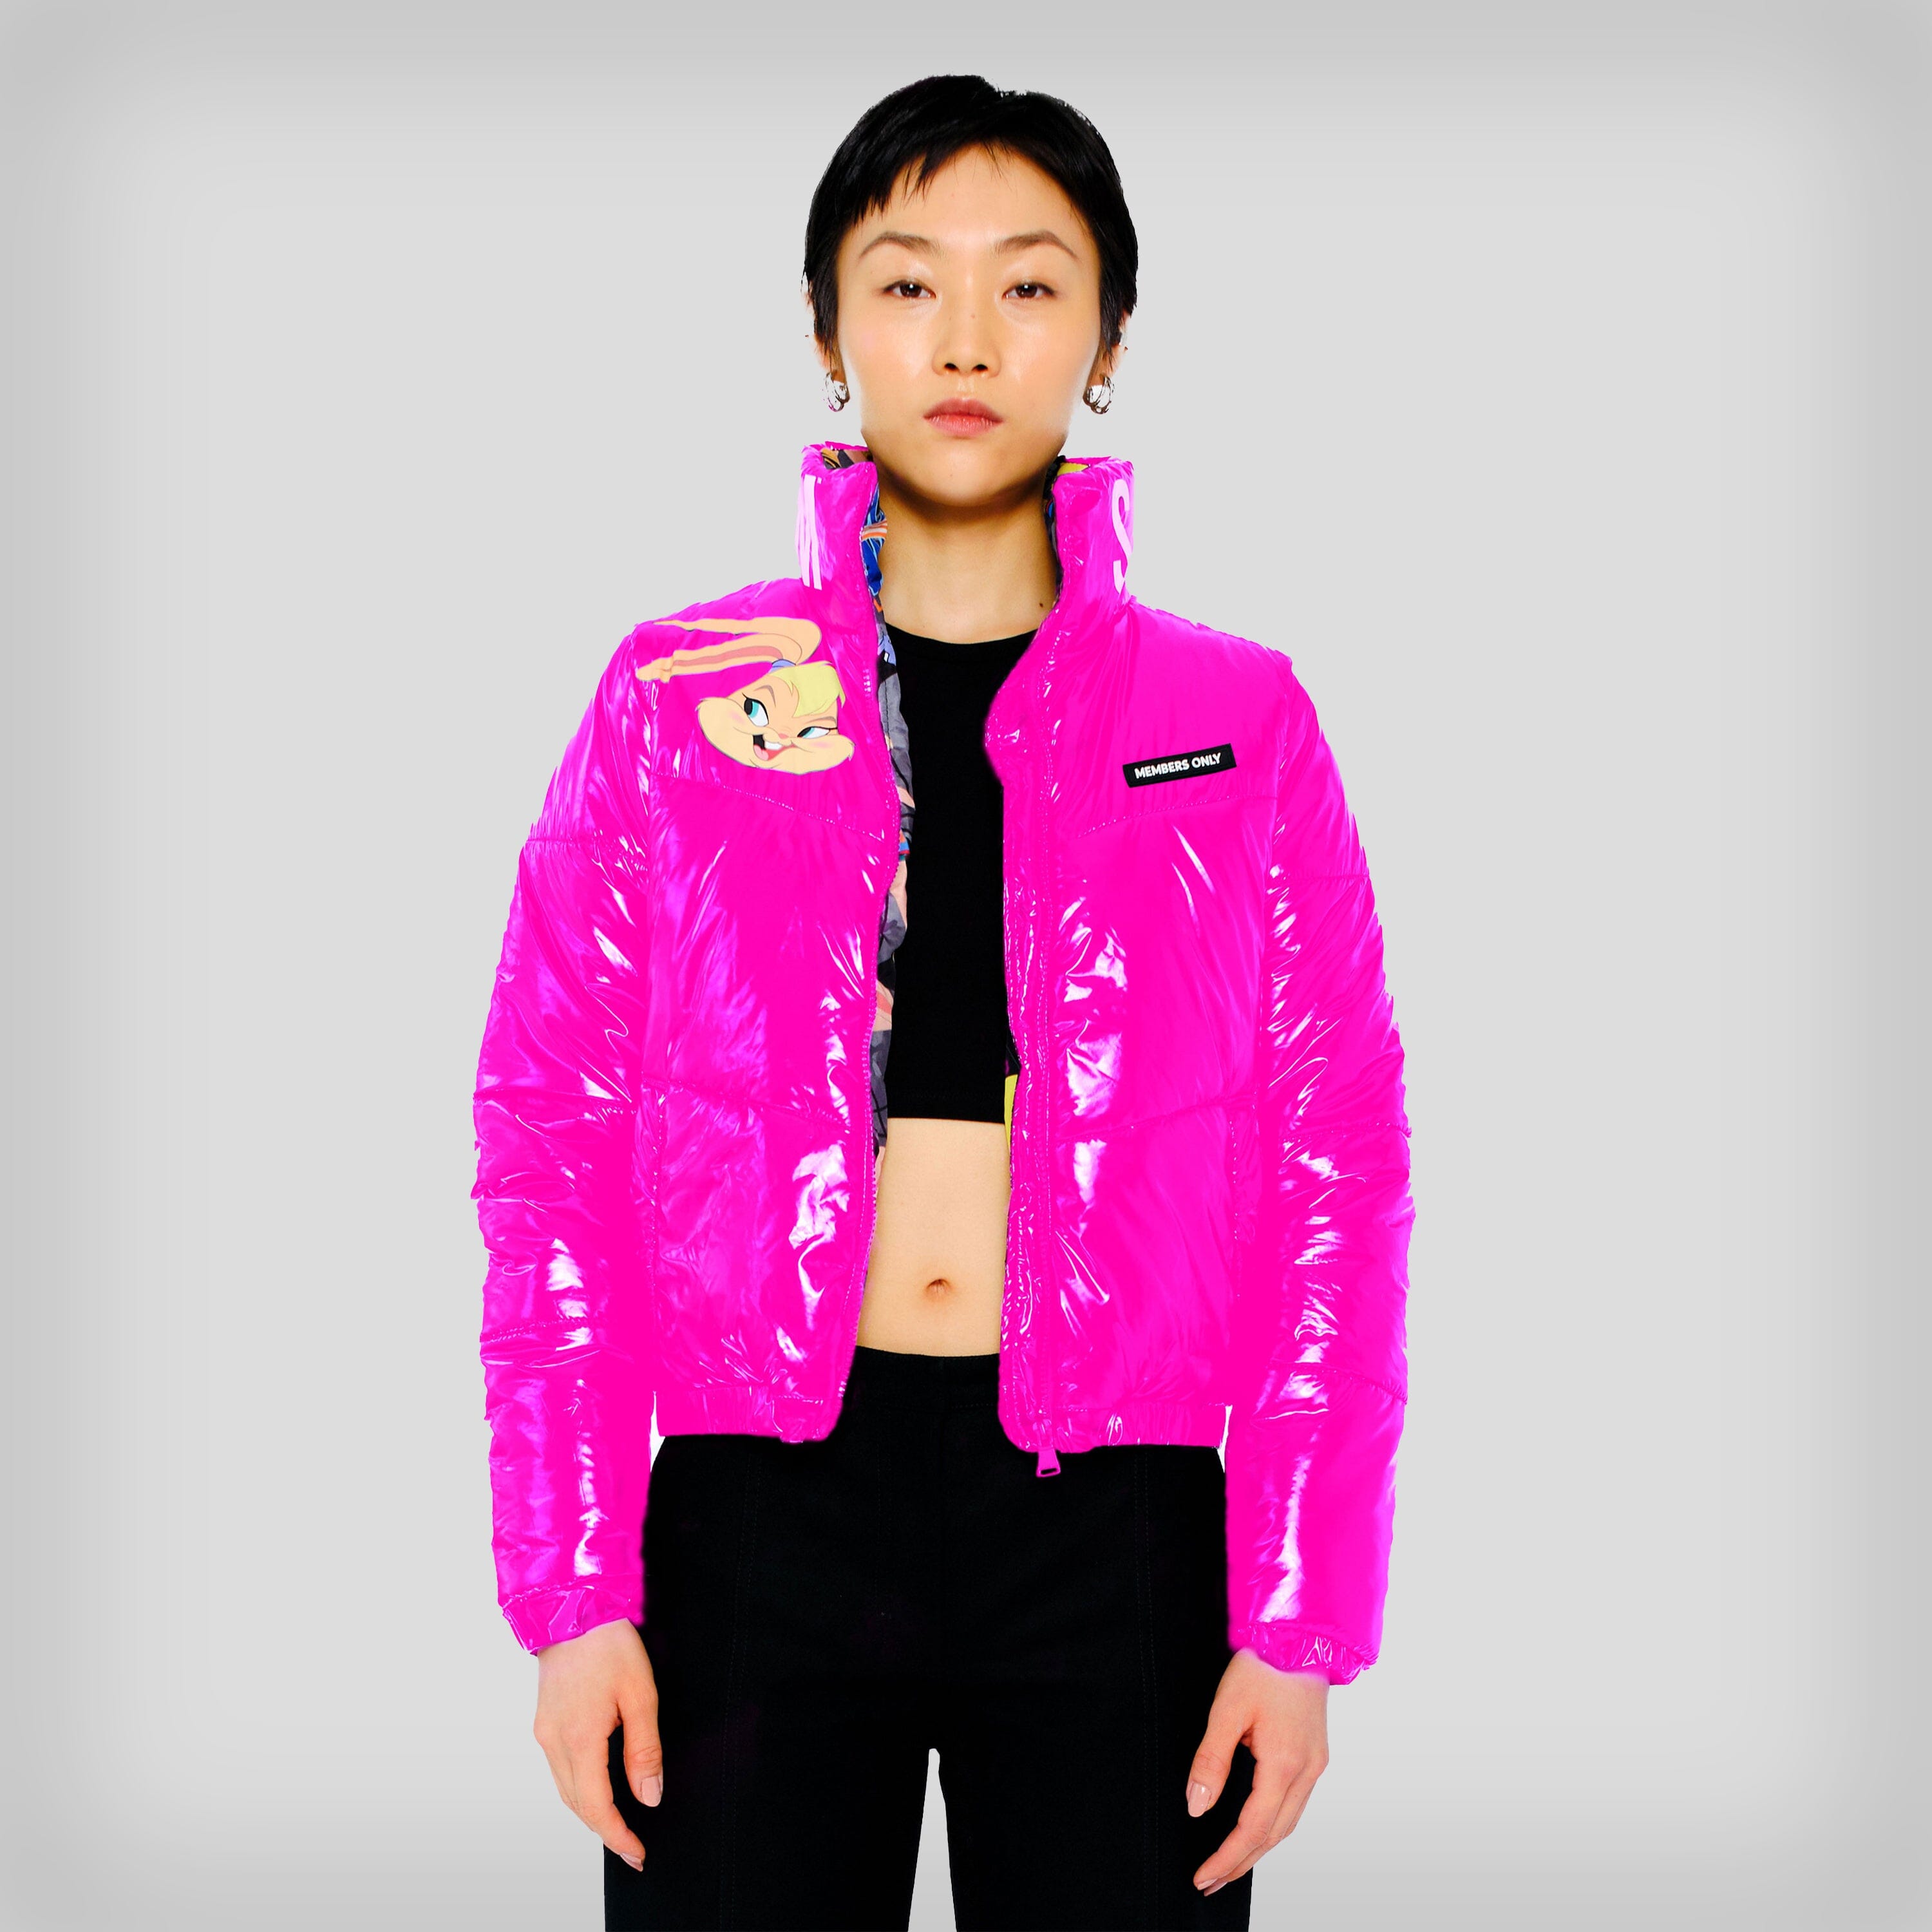 Women's Space Jam High Shine Puffer with Printed Jacket - FINAL SALE Womens Jacket Members Only Pink SMALL 